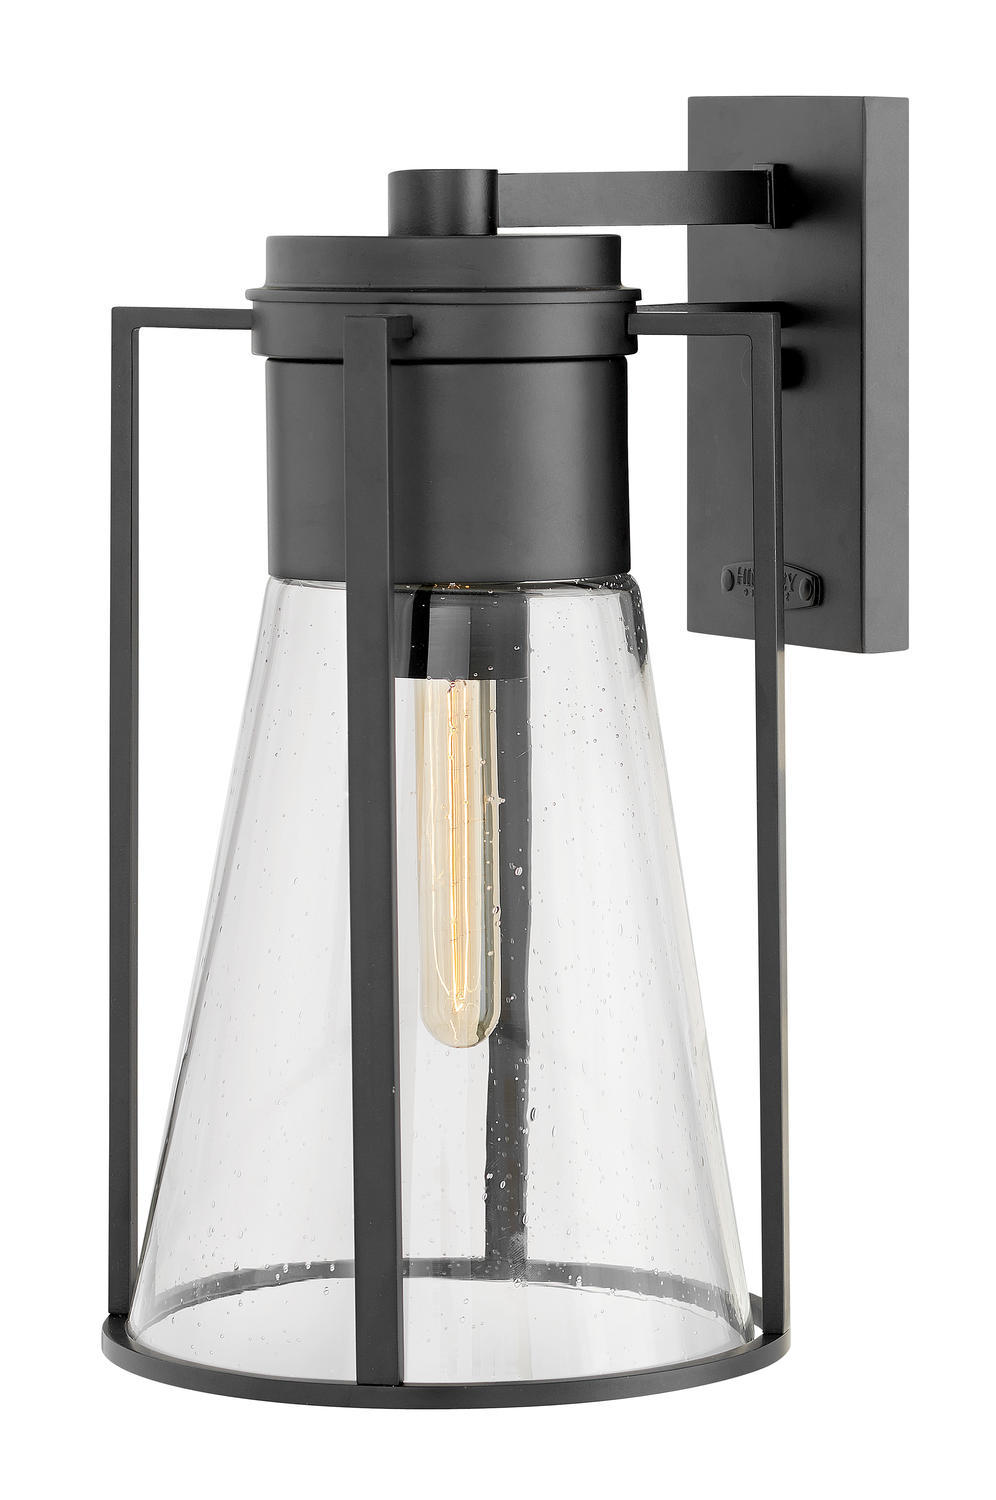 Hinkley OUTDOOR REFINERY Large Outdoor Wall Mount Lantern 2825